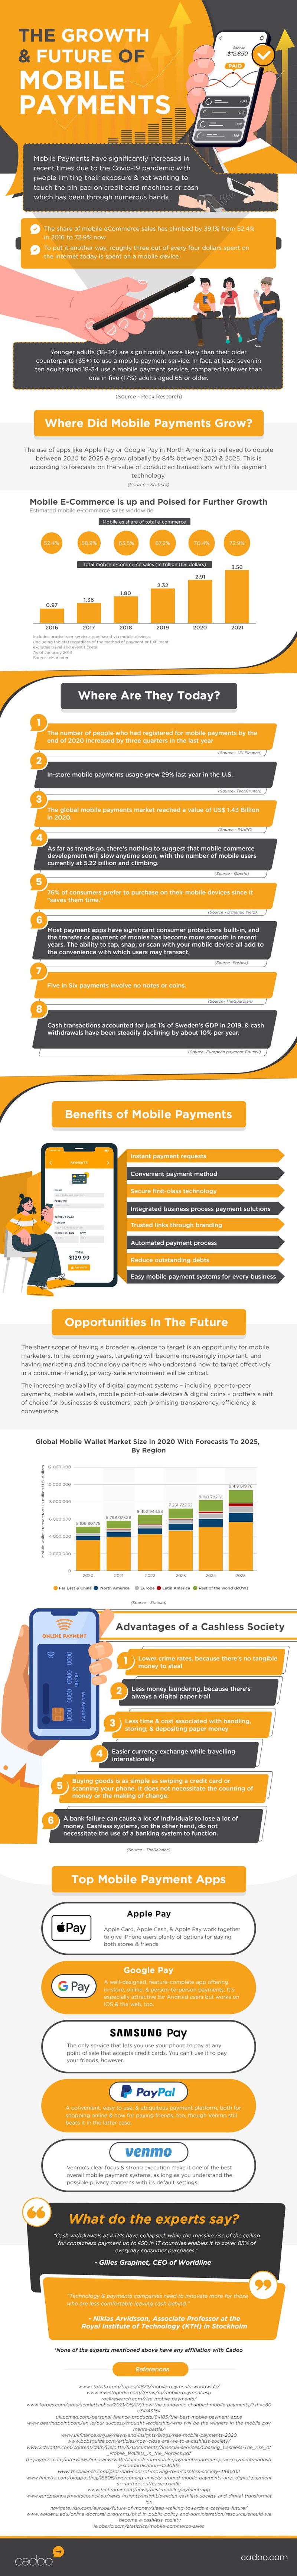 the-growth--future-of-mobile-payments-infographic_61c30f5ec5e82.jpeg